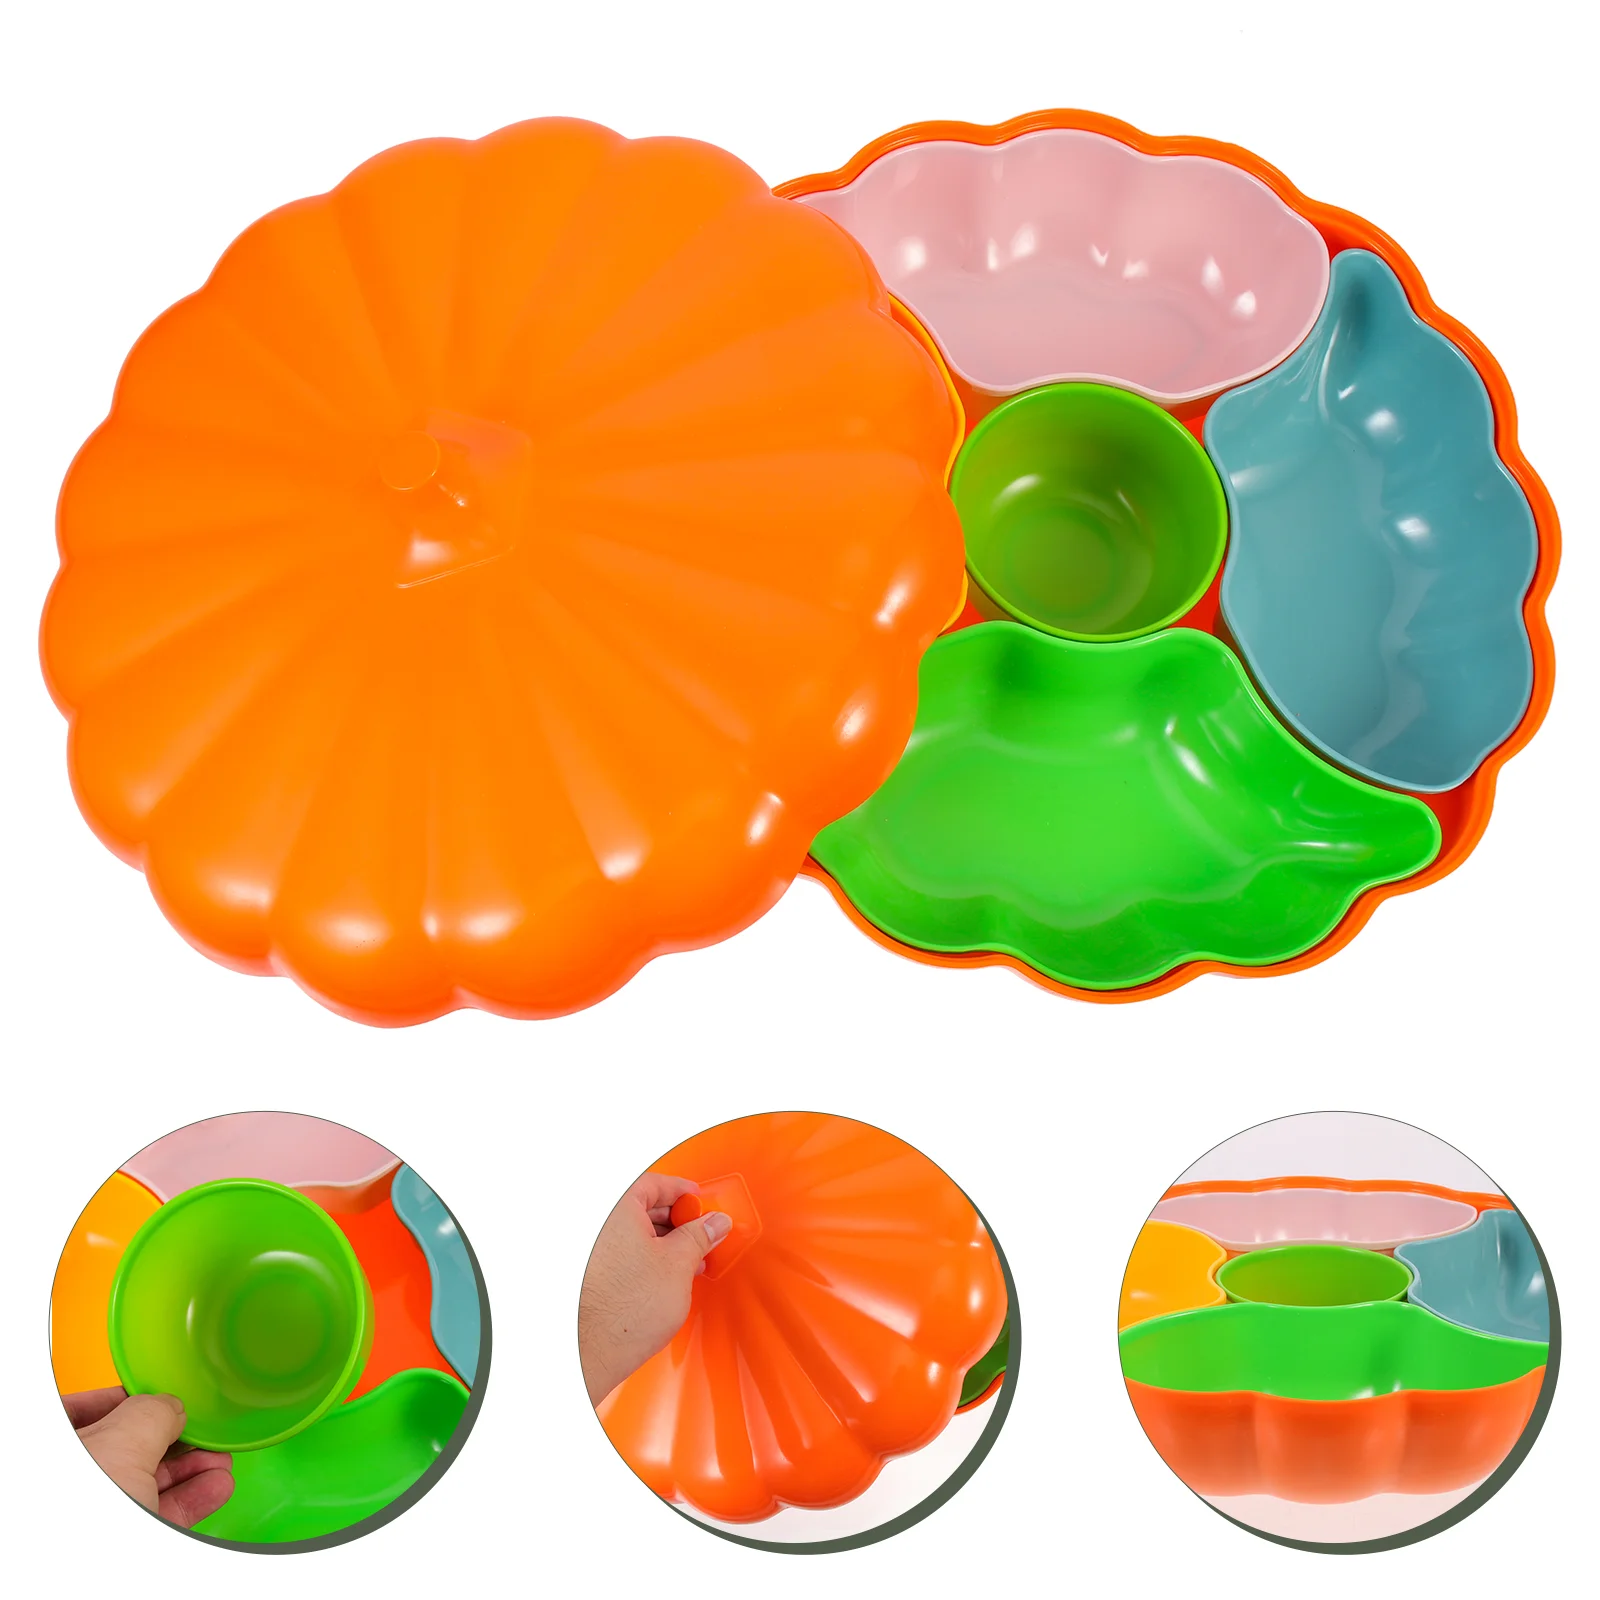 

Tray Serving Storage Fruit Plate Snack Candy Appetizer Dish Grid Dessert Dried Nuts Bowls Plates Veggie Tea Nut Multi Divided